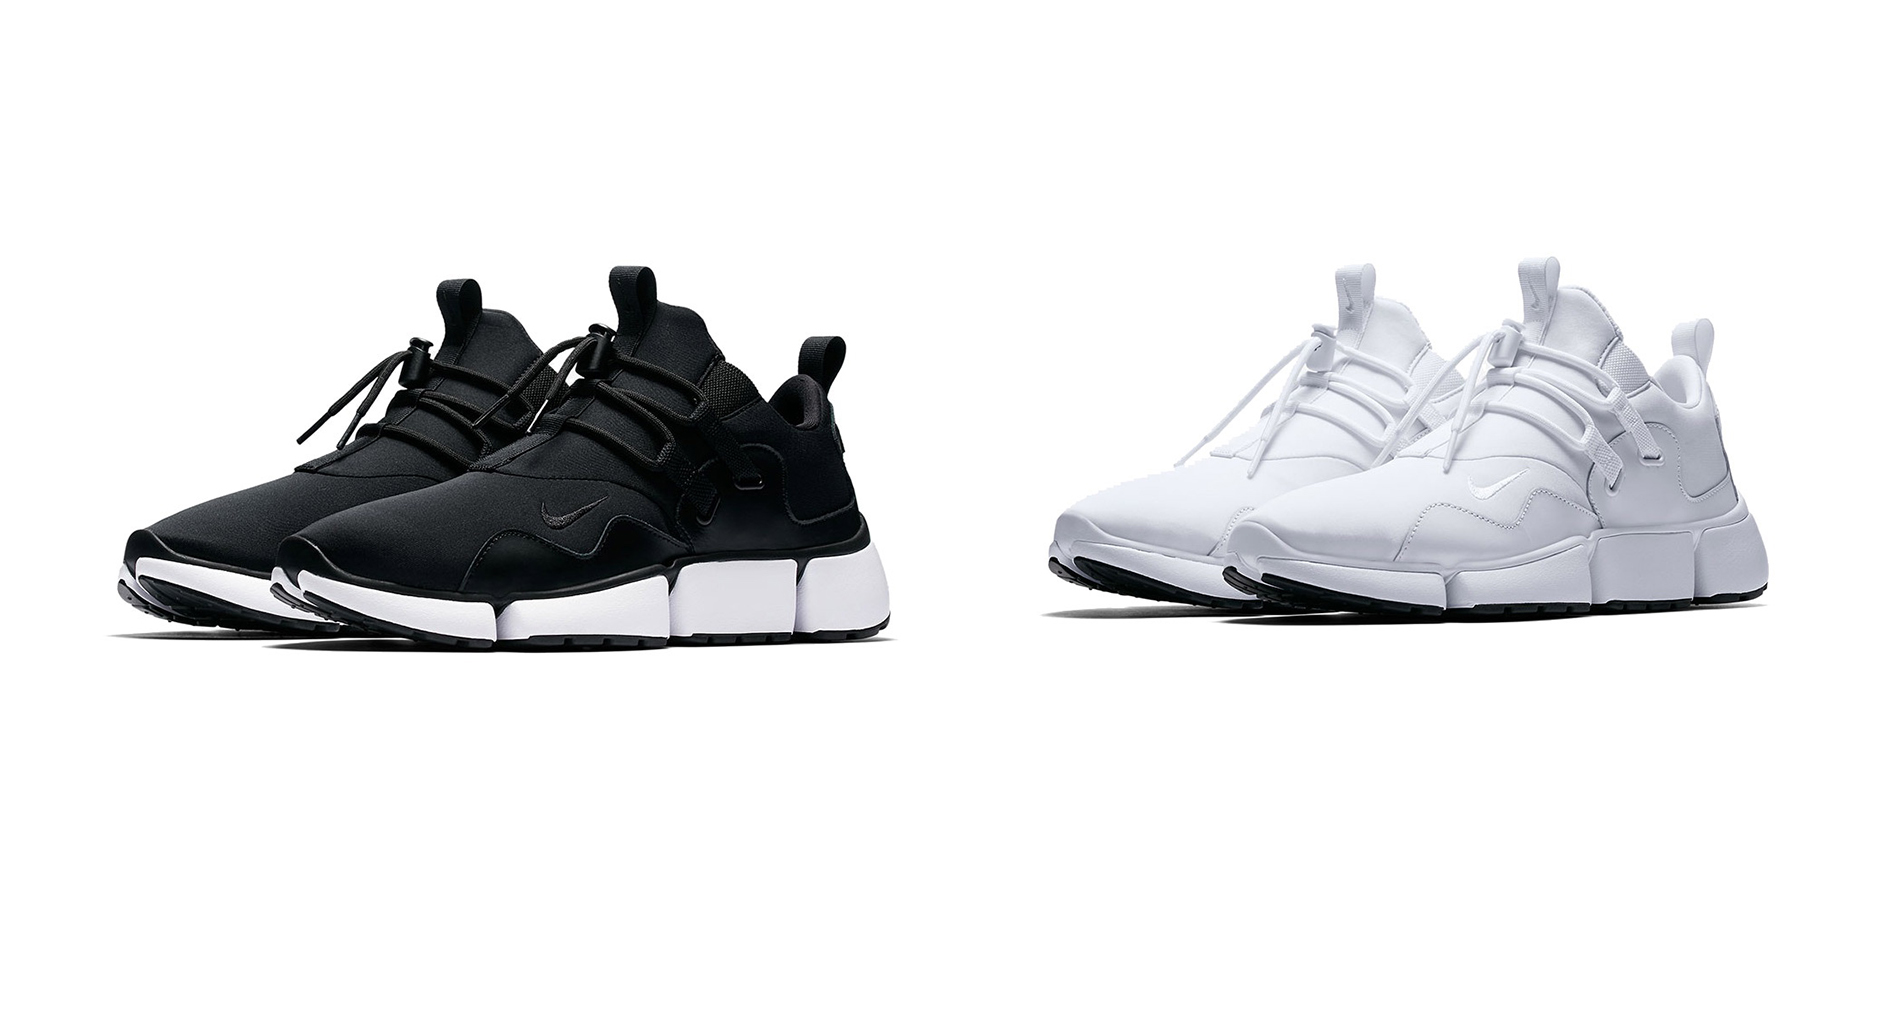 Nike’s Pocket Knife DM to drop in new colourways